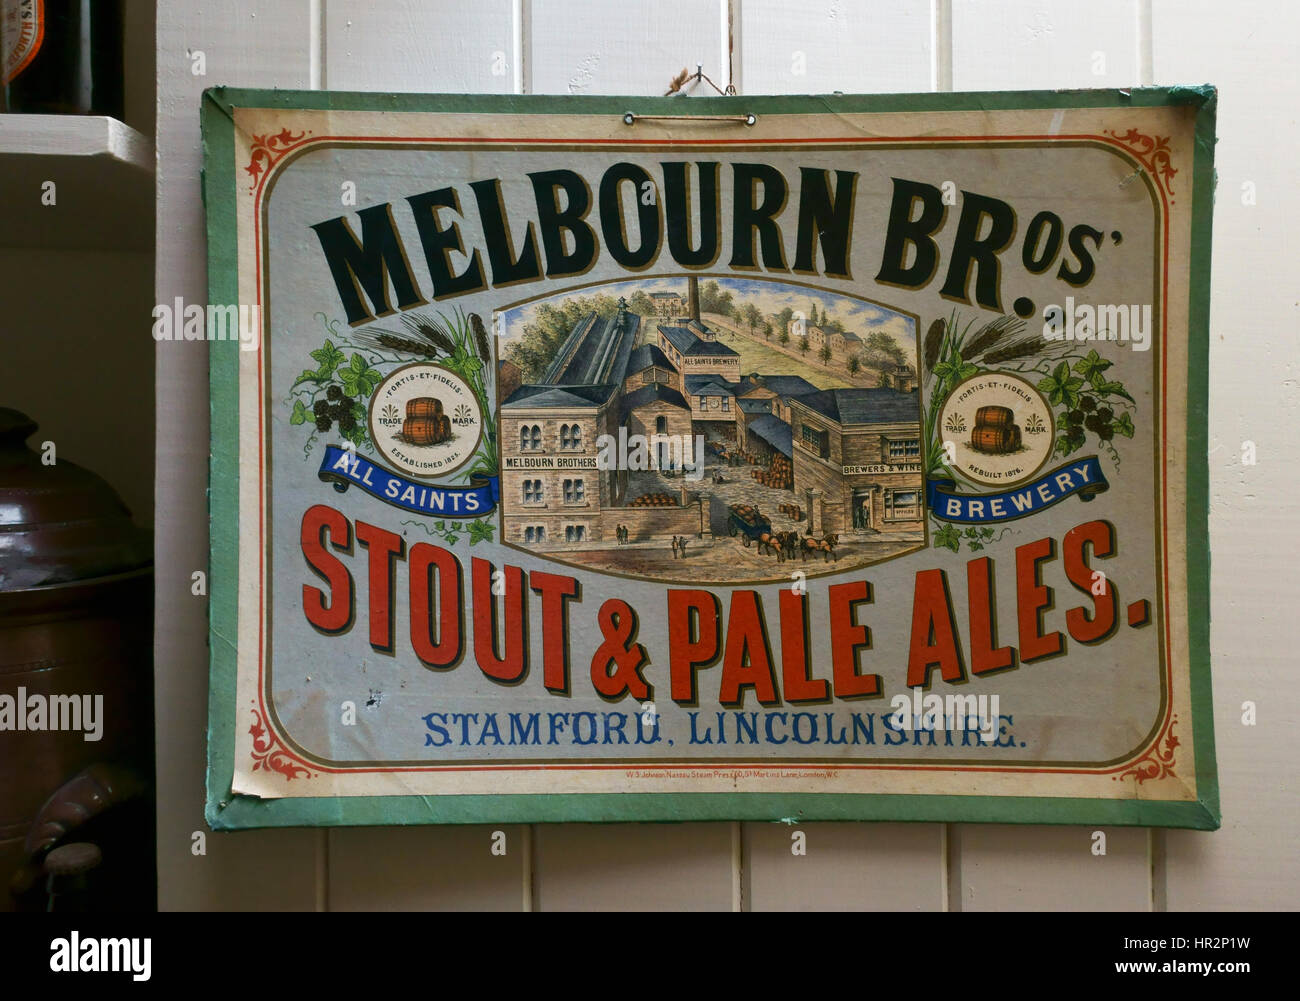 poster for the Melbourn Brothers brewery Stamford England UK Stock Photo